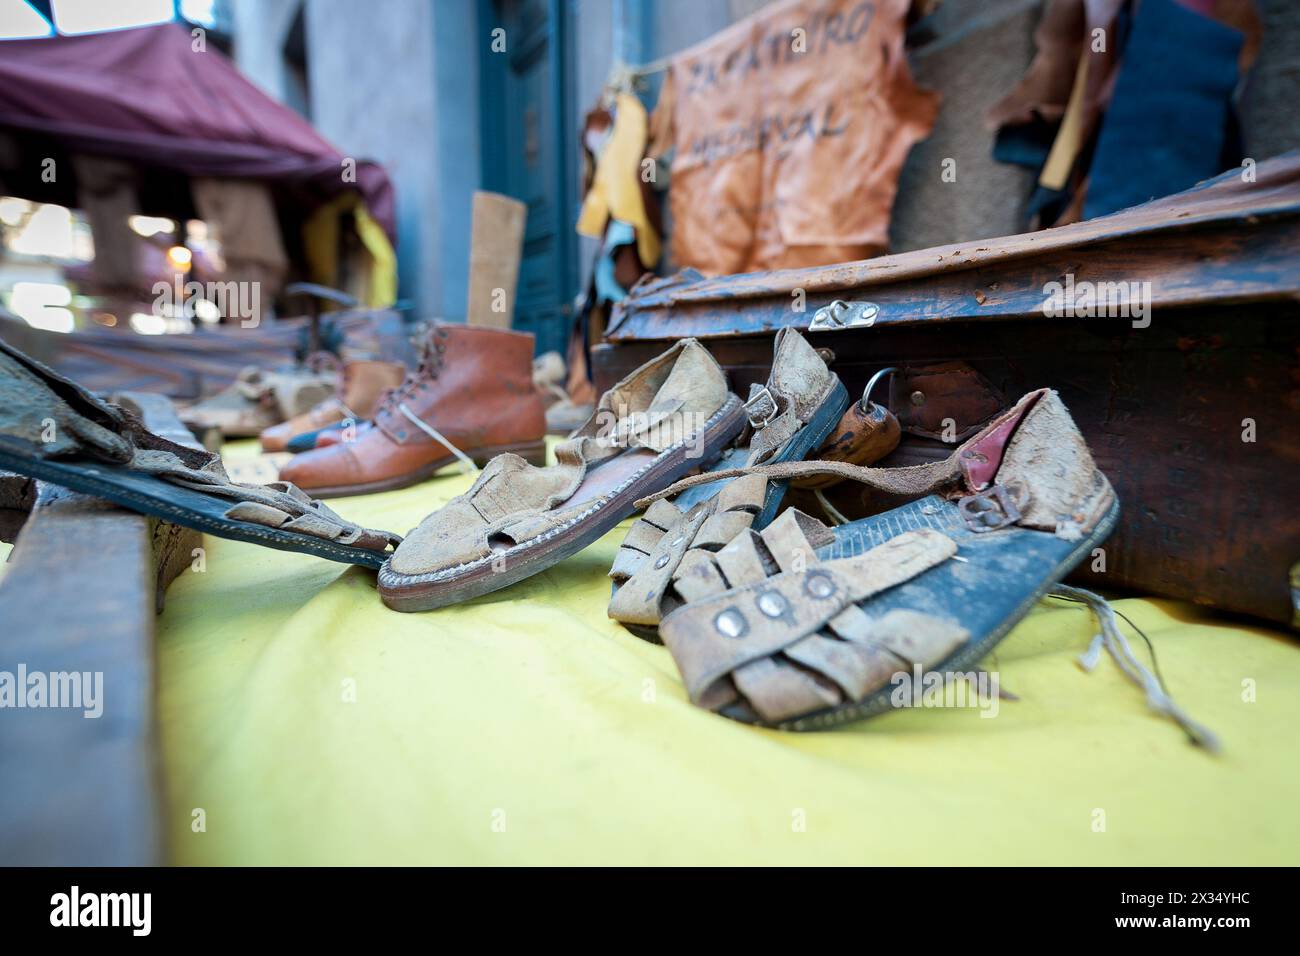 Handmade leather shoes exposed on table with various remittances Stock Photo